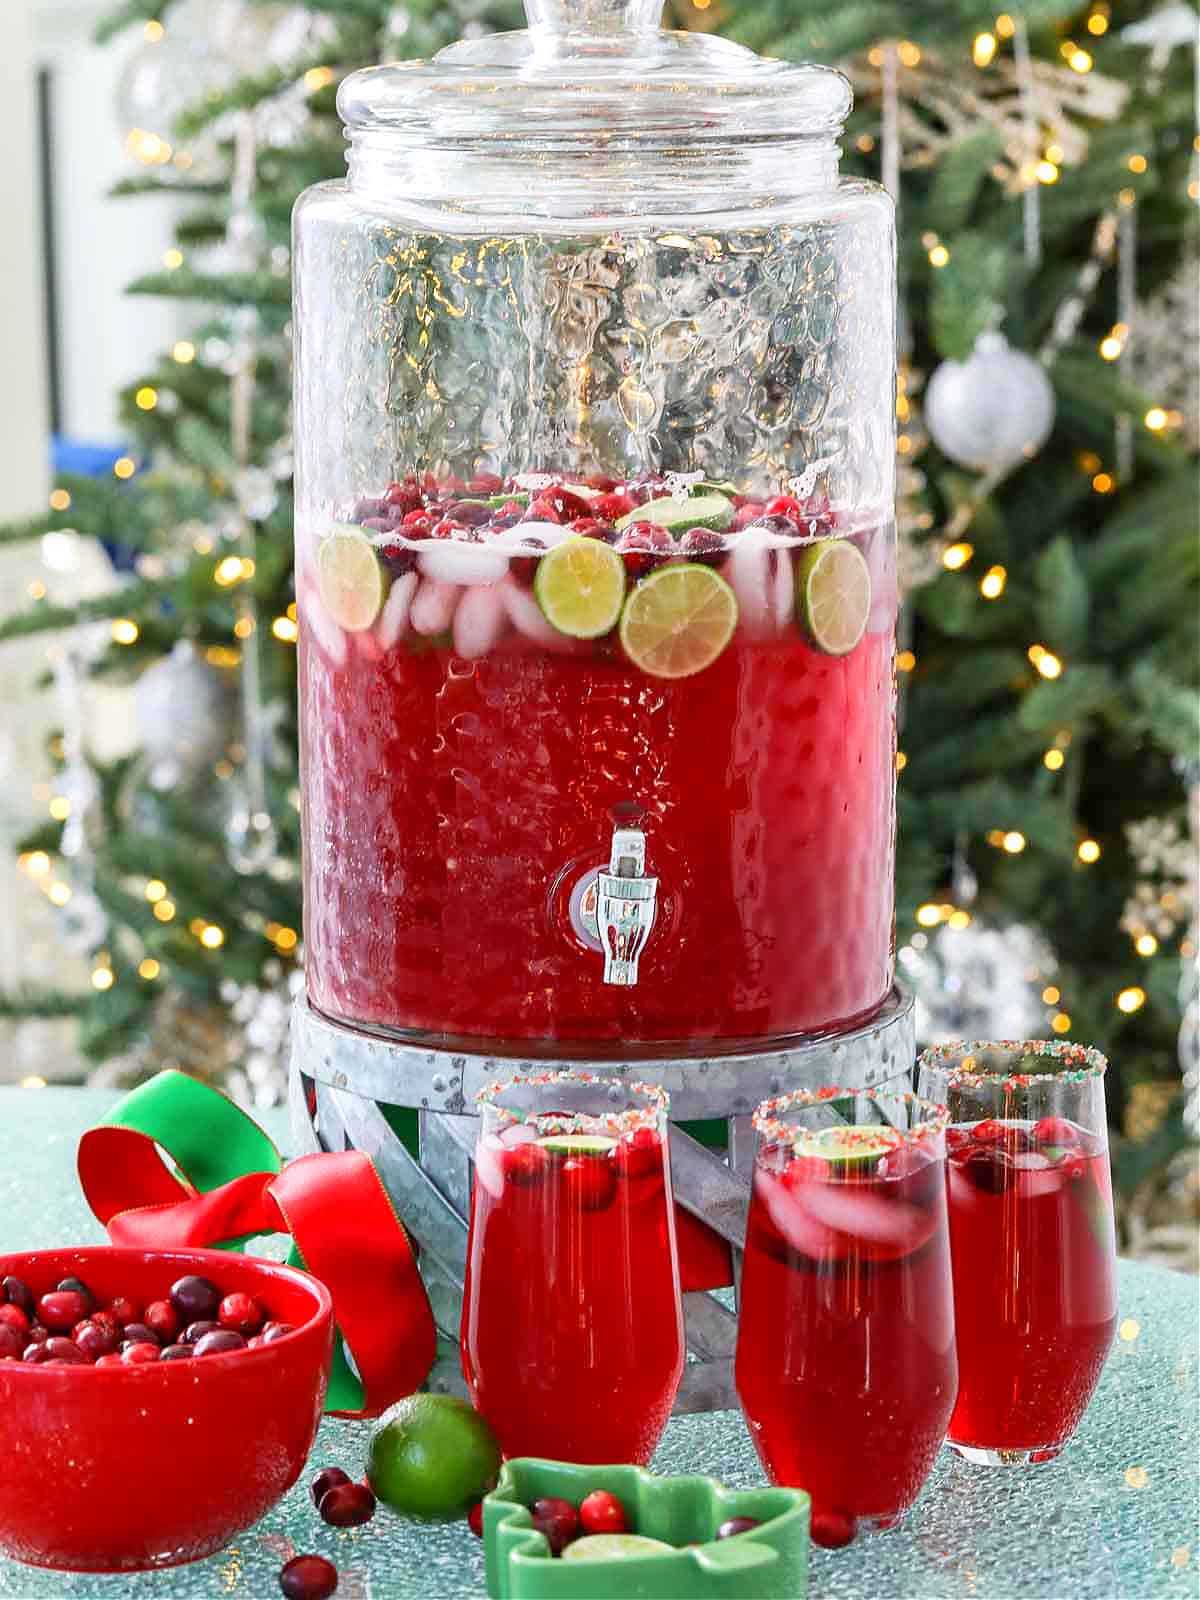 https://www.delicioustable.com/wp-content/uploads/2021/12/Christmas-Punch-with-glasses-1.jpg